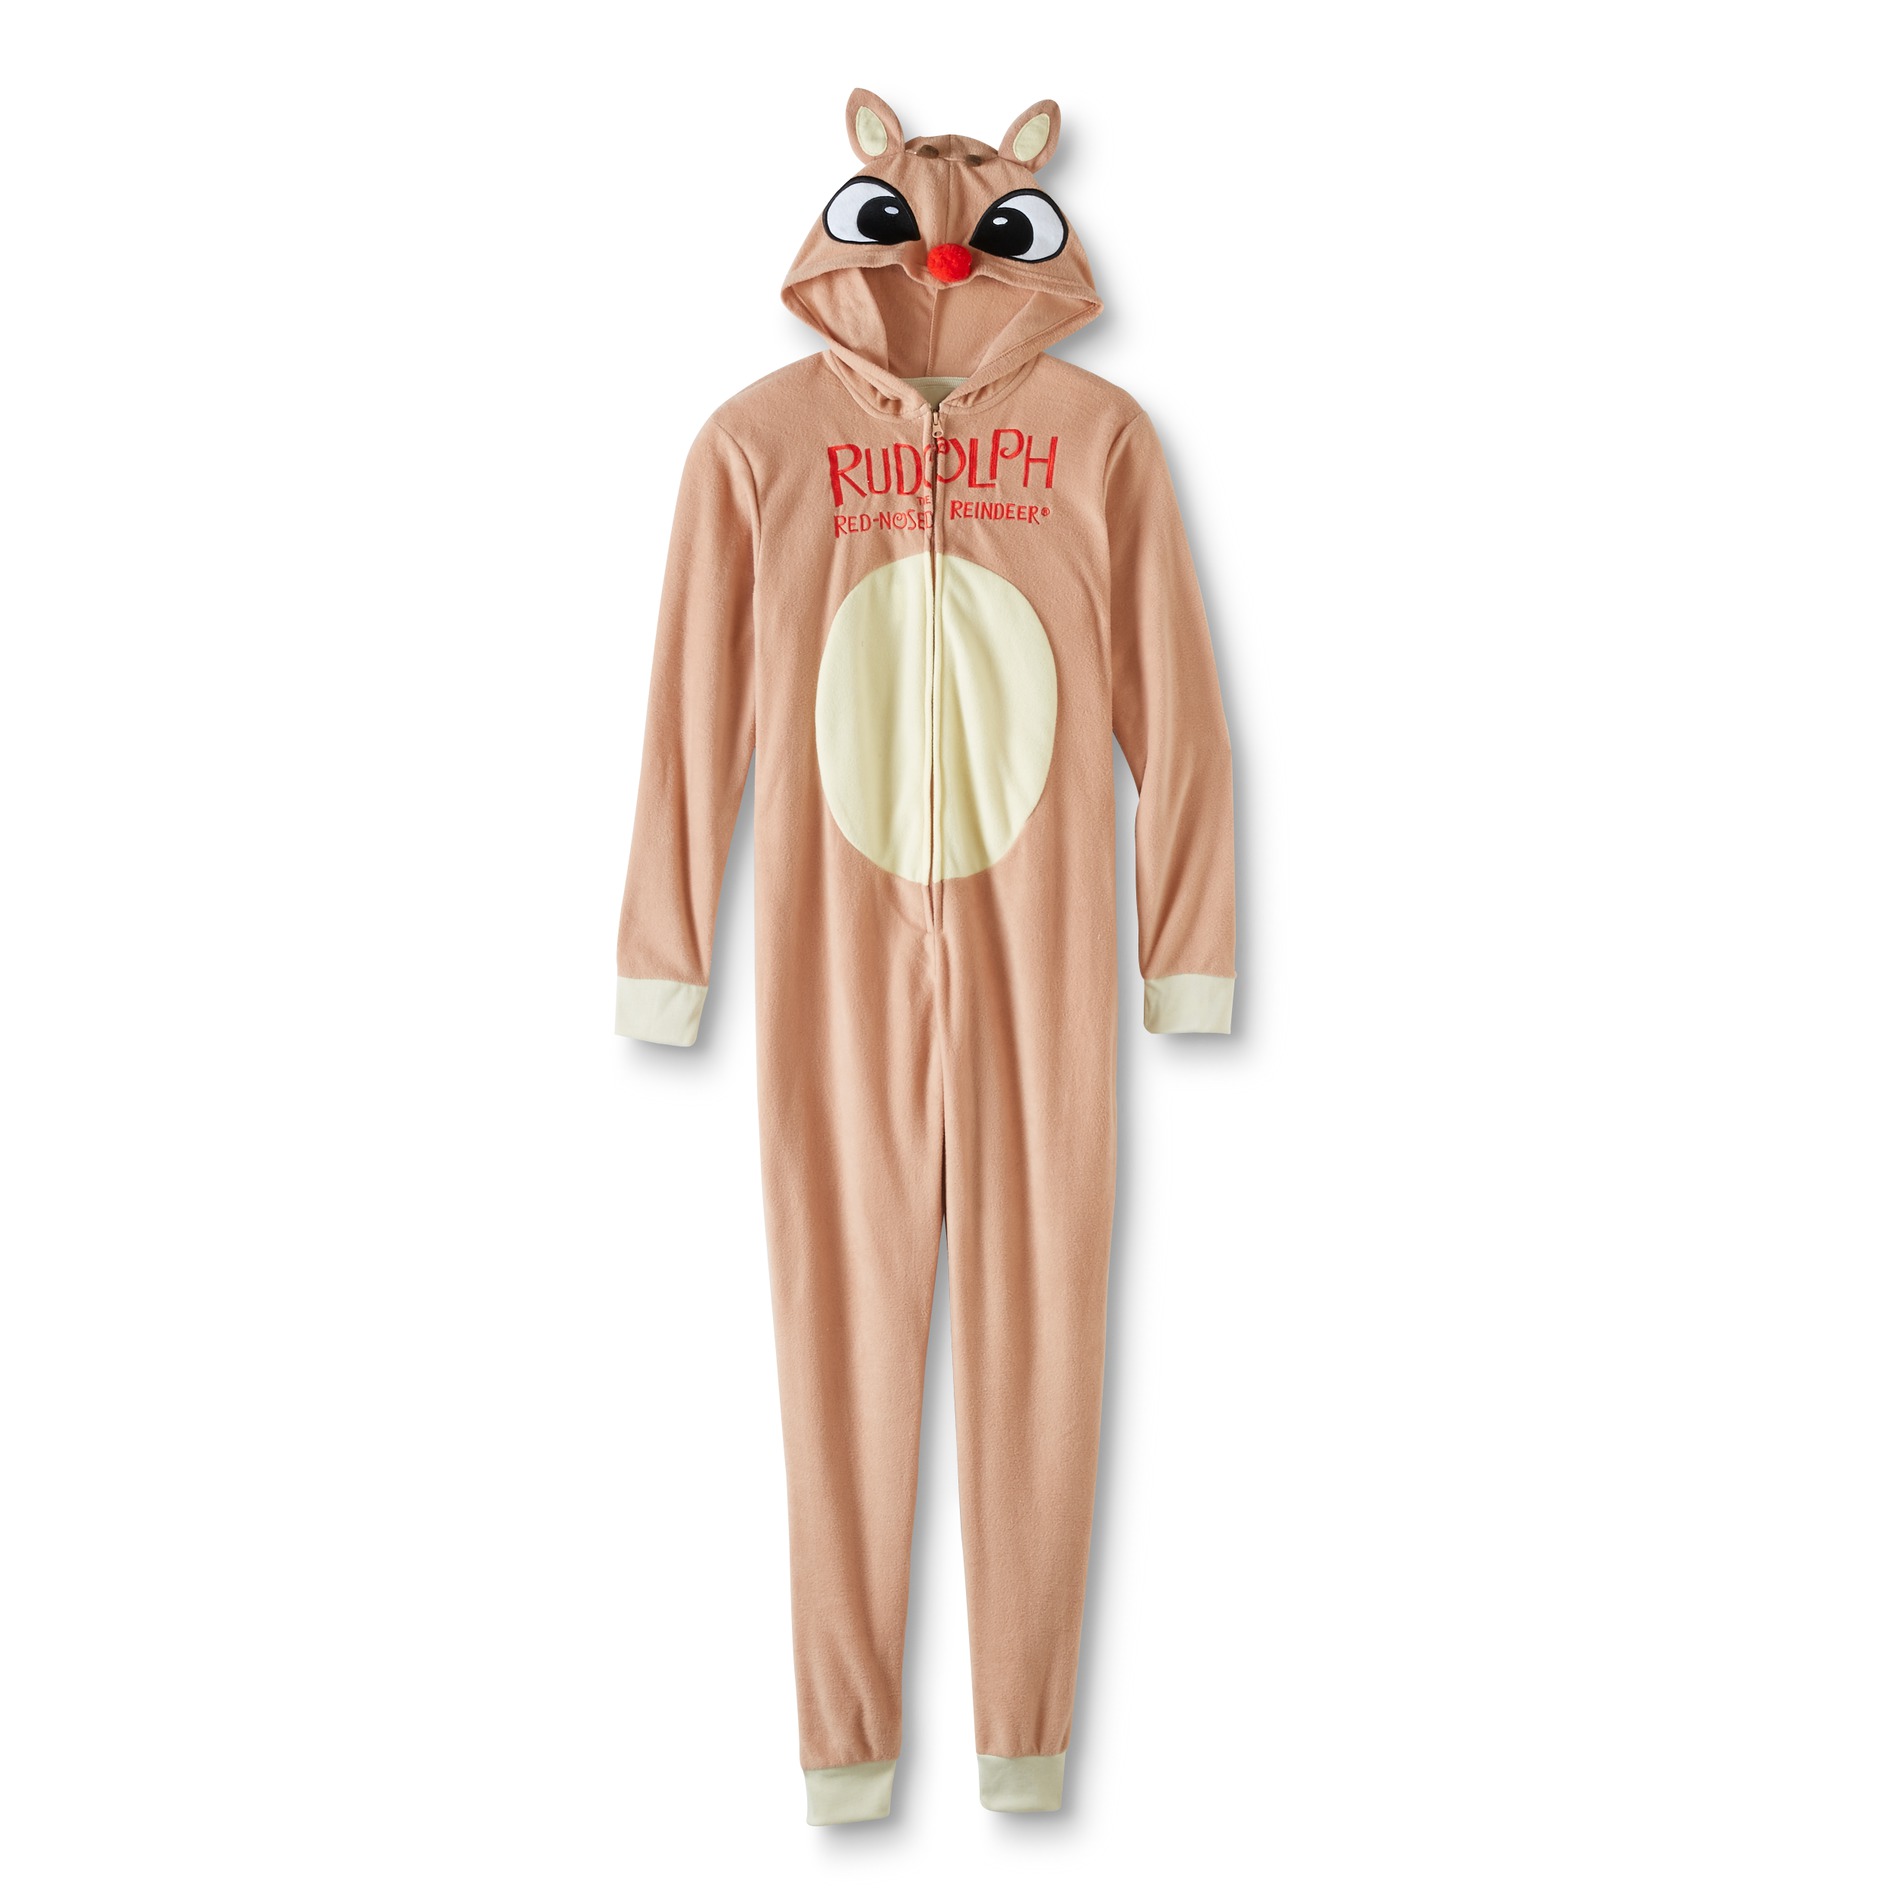 Rudolph the Red-Nosed Reindeer Women's One-Piece Pajamas